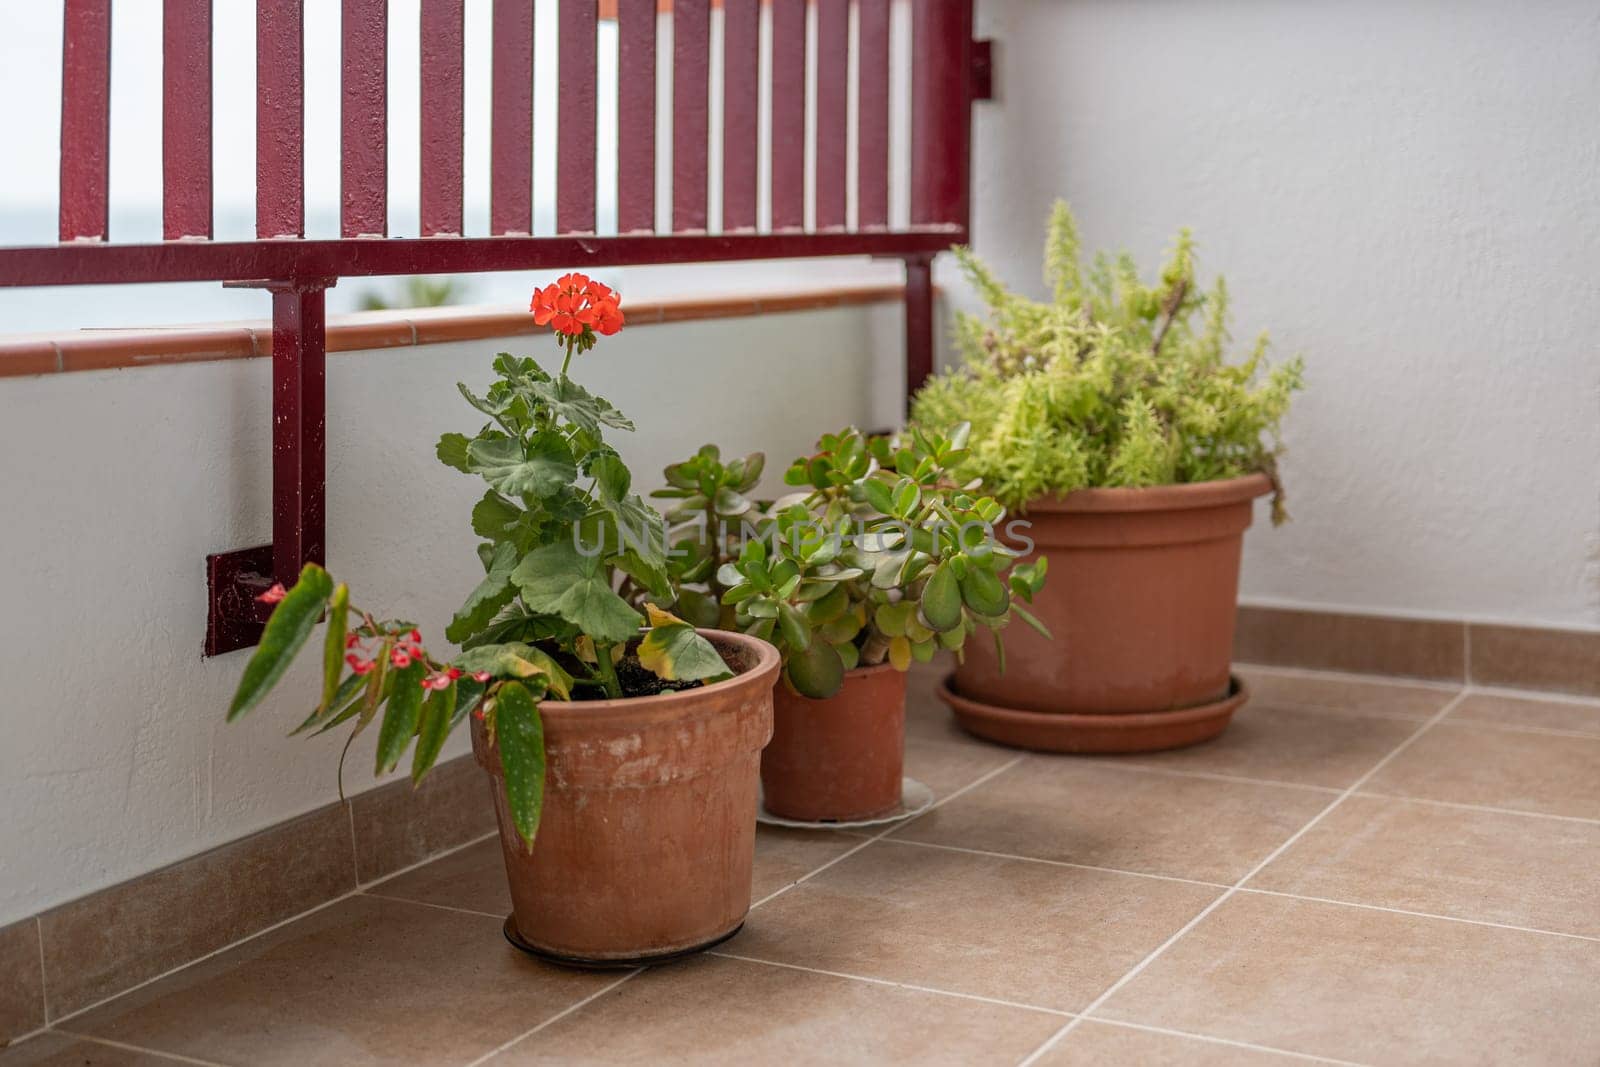 A balcony with pots of plants, including a red flower, adds vibrancy to the architecture. The home garden exudes growth and tranquility.